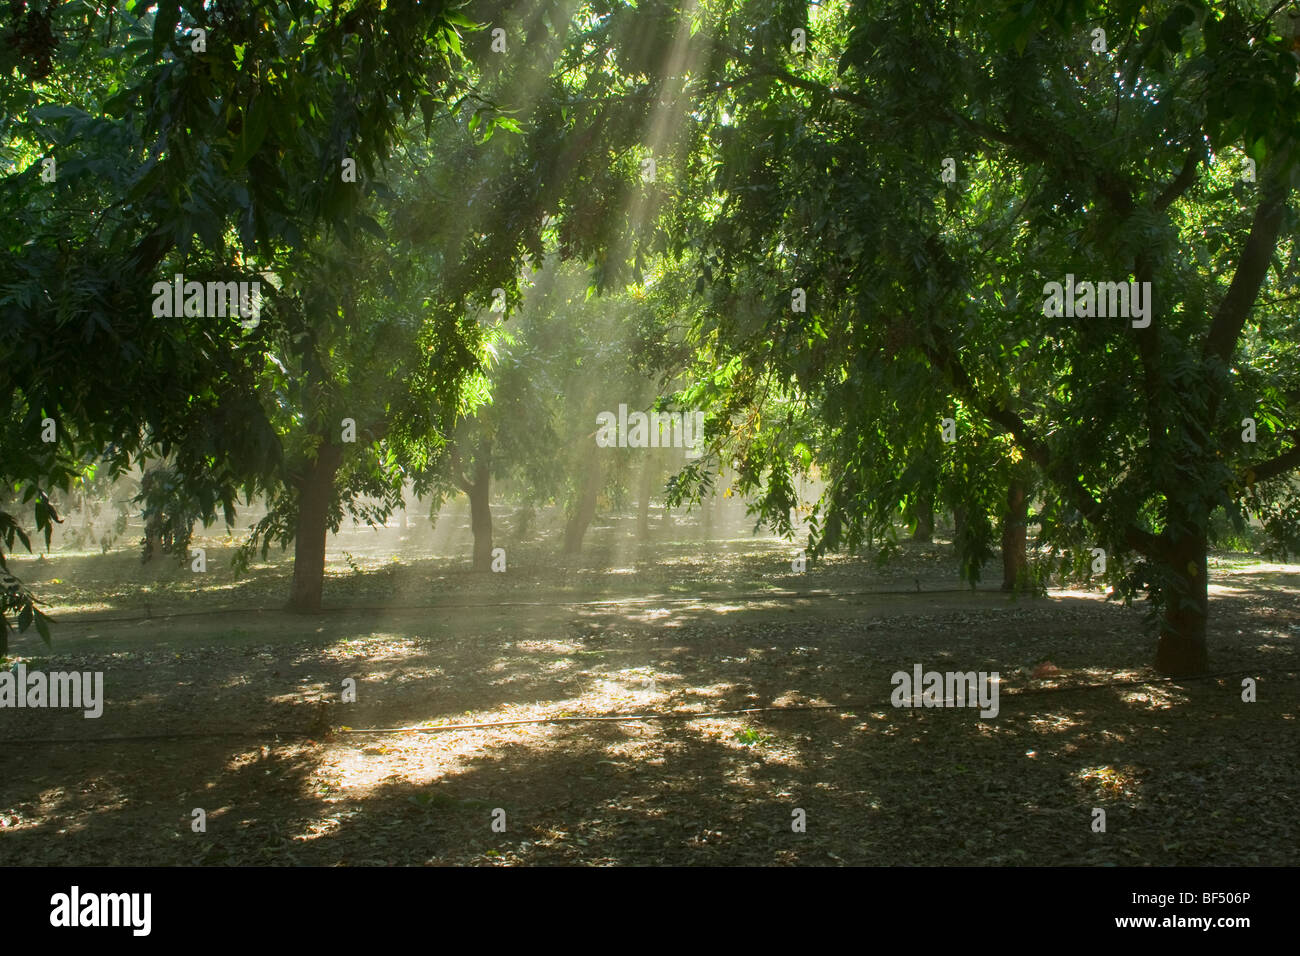 Agriculture - Mature pecan orchard with dust in the air caused by the Autumn harvest / near Corning, California, USA. Stock Photo